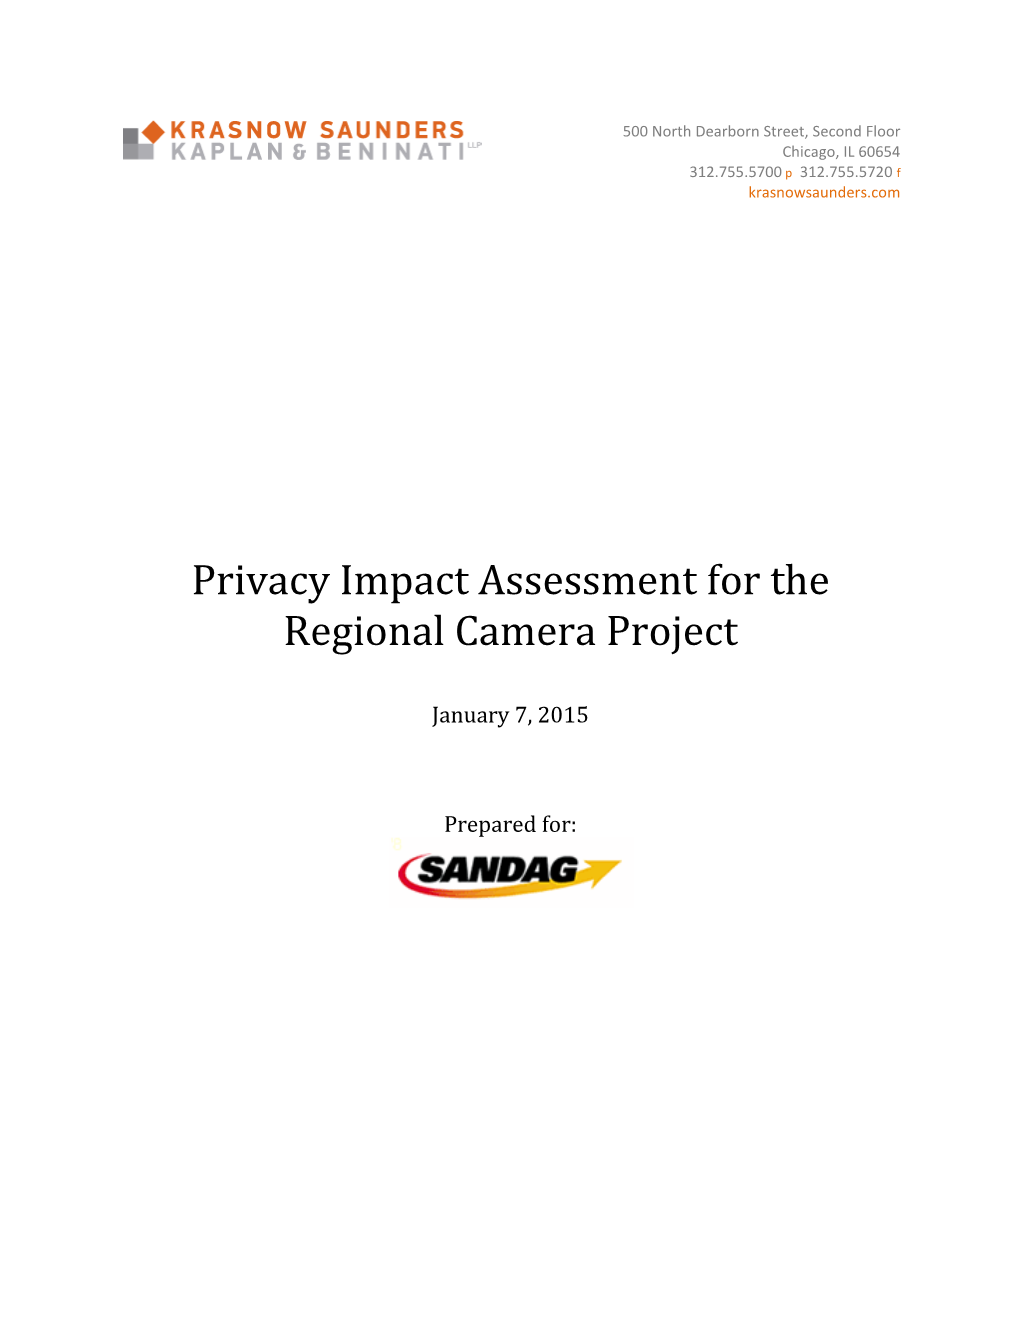 Privacy Impact Assessment for the Regional Camera Project